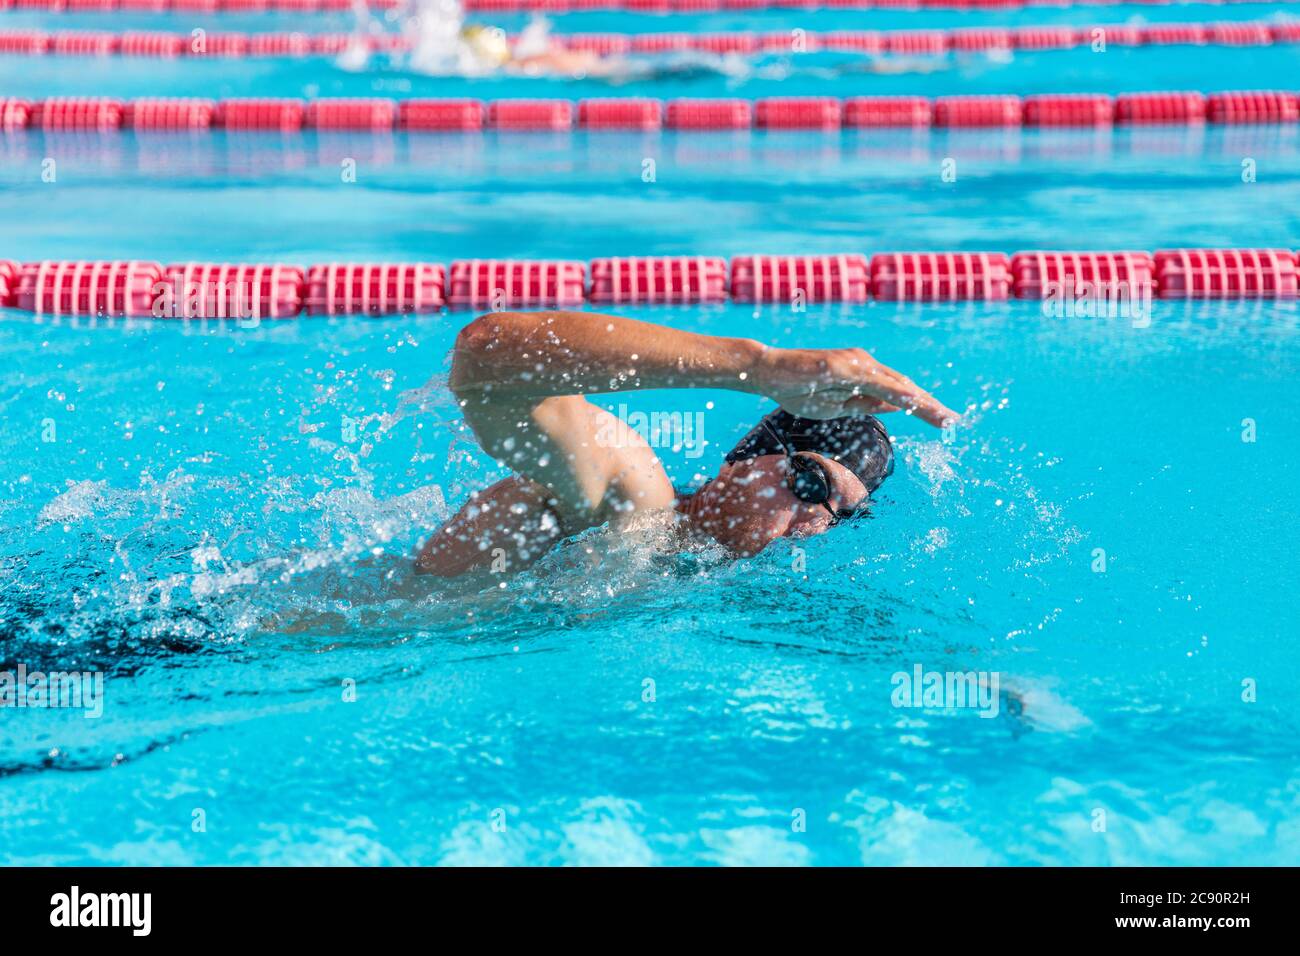 Swimmer man fitness training at swimming pool. Professional male athlete doing crawl freestyle stroke technique Stock Photo